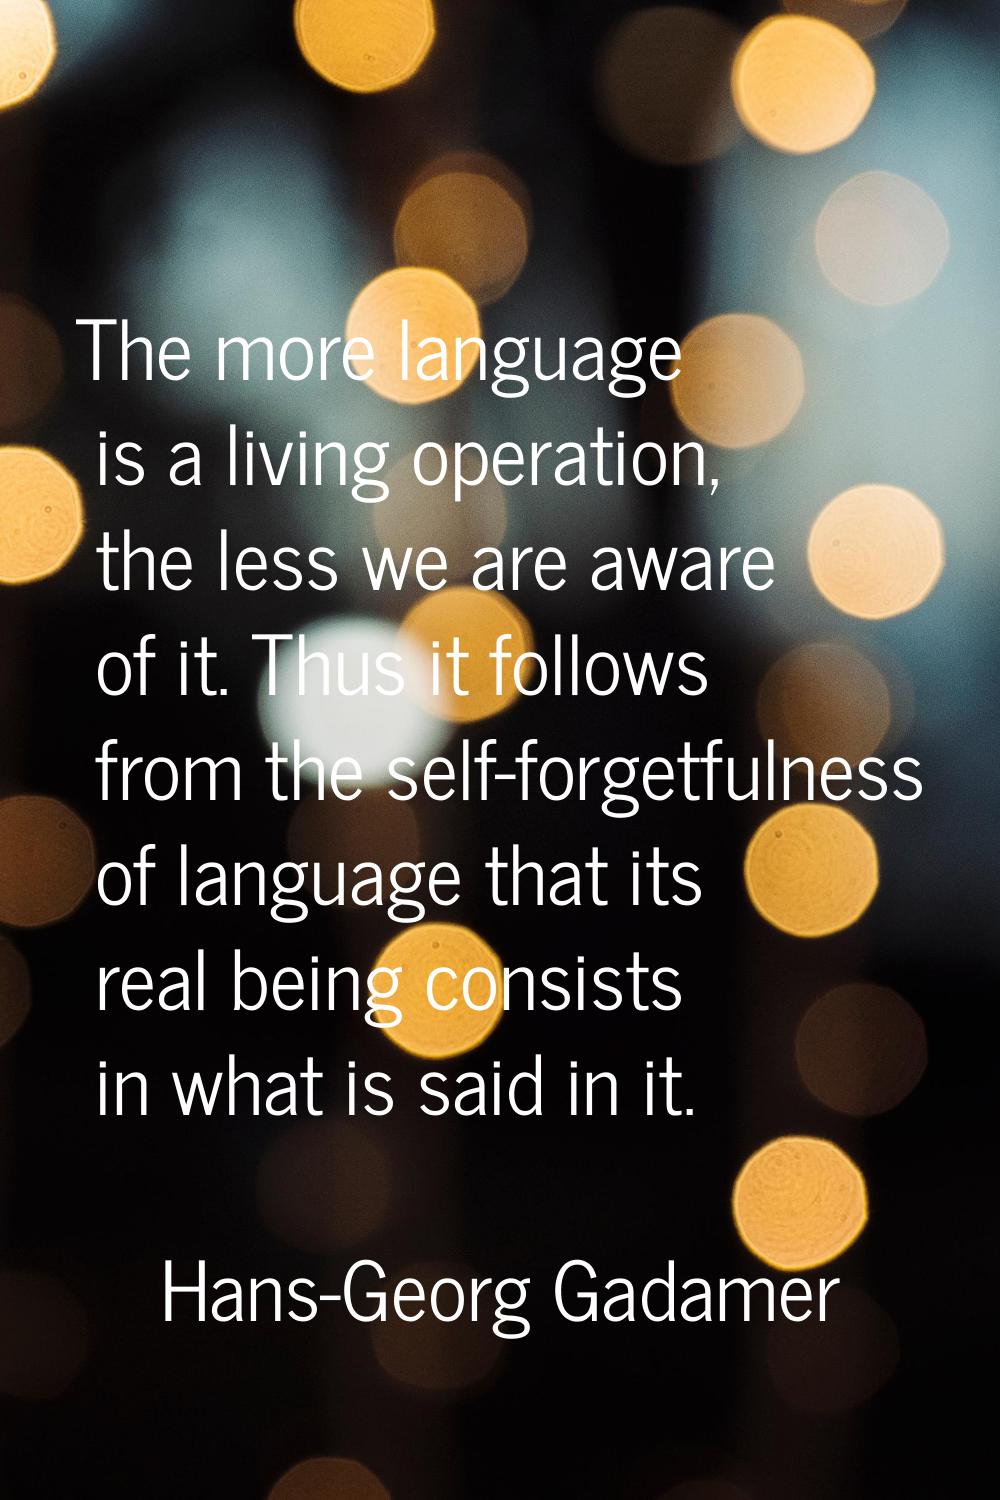 The more language is a living operation, the less we are aware of it. Thus it follows from the self